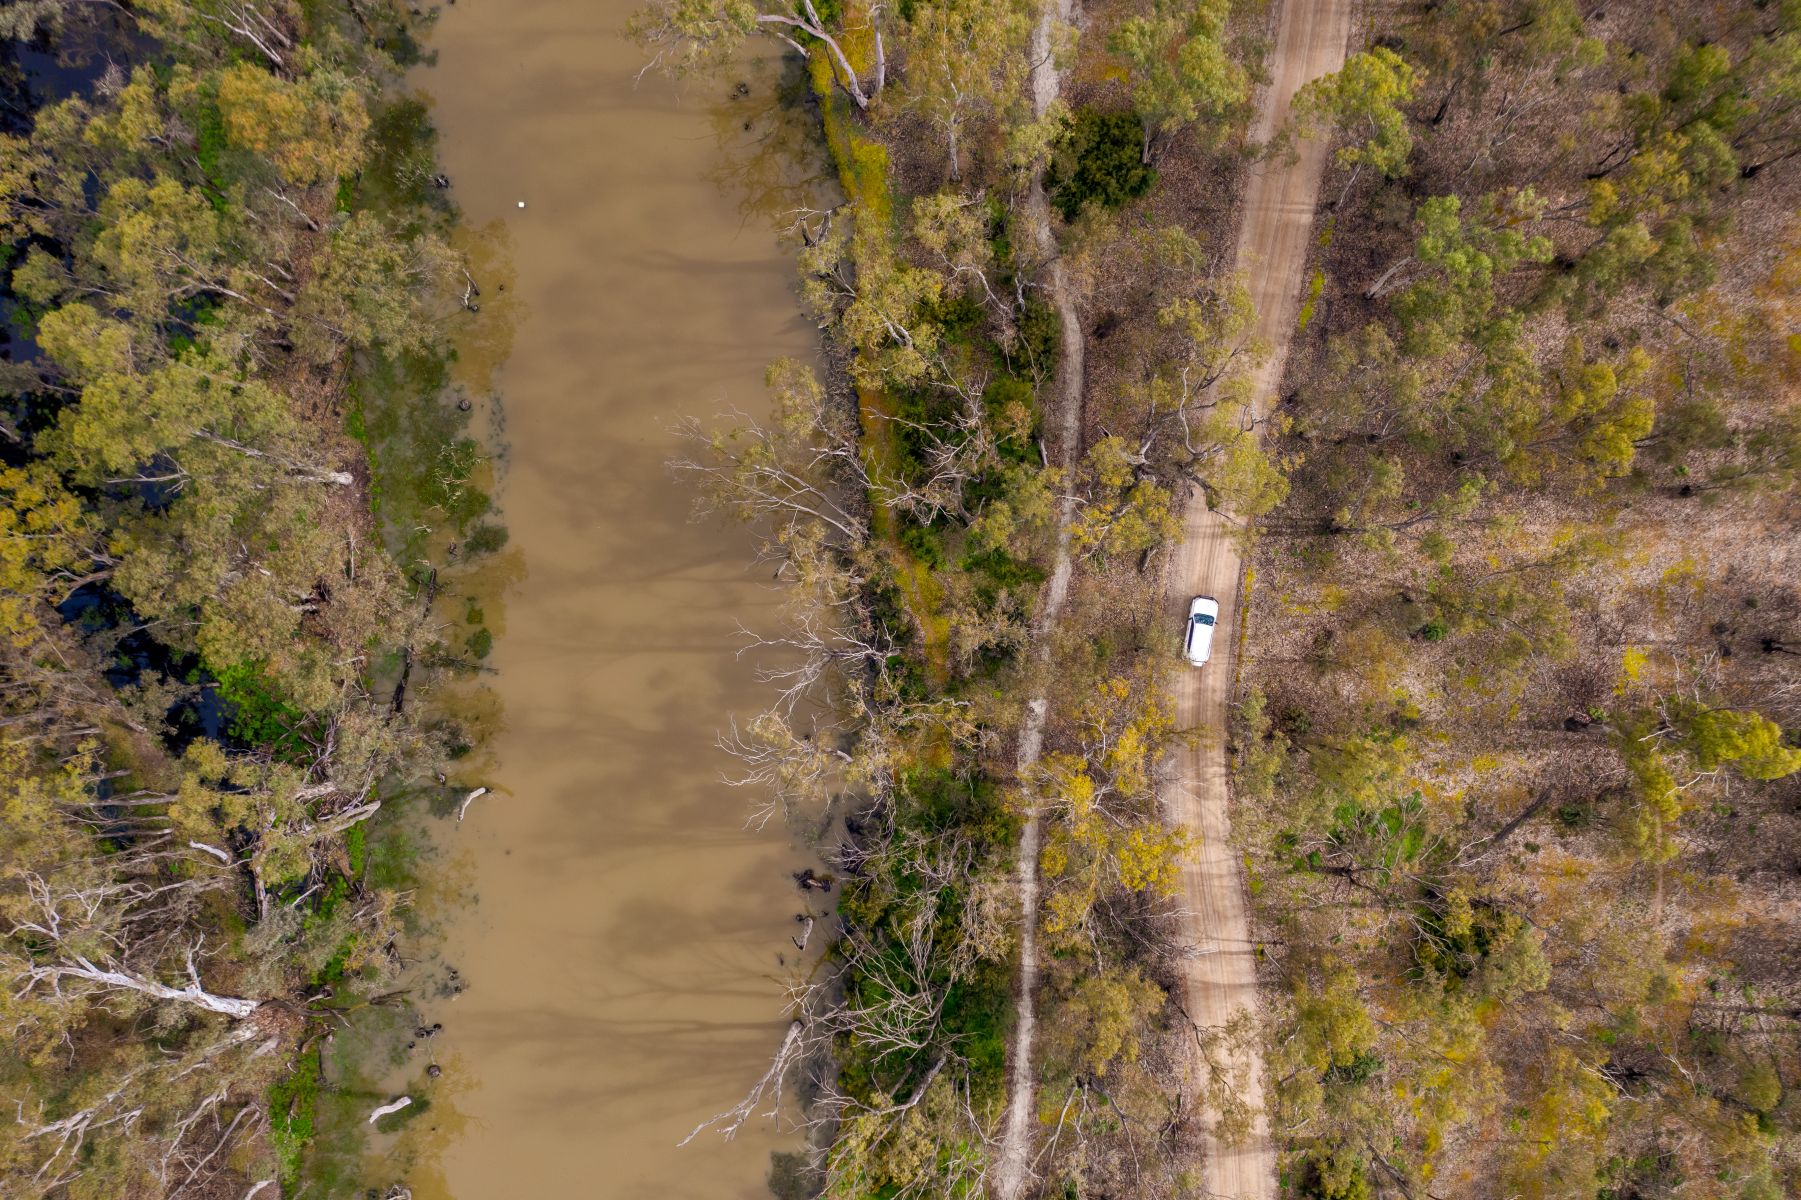 An aerial view of a river running alongside a dirt track